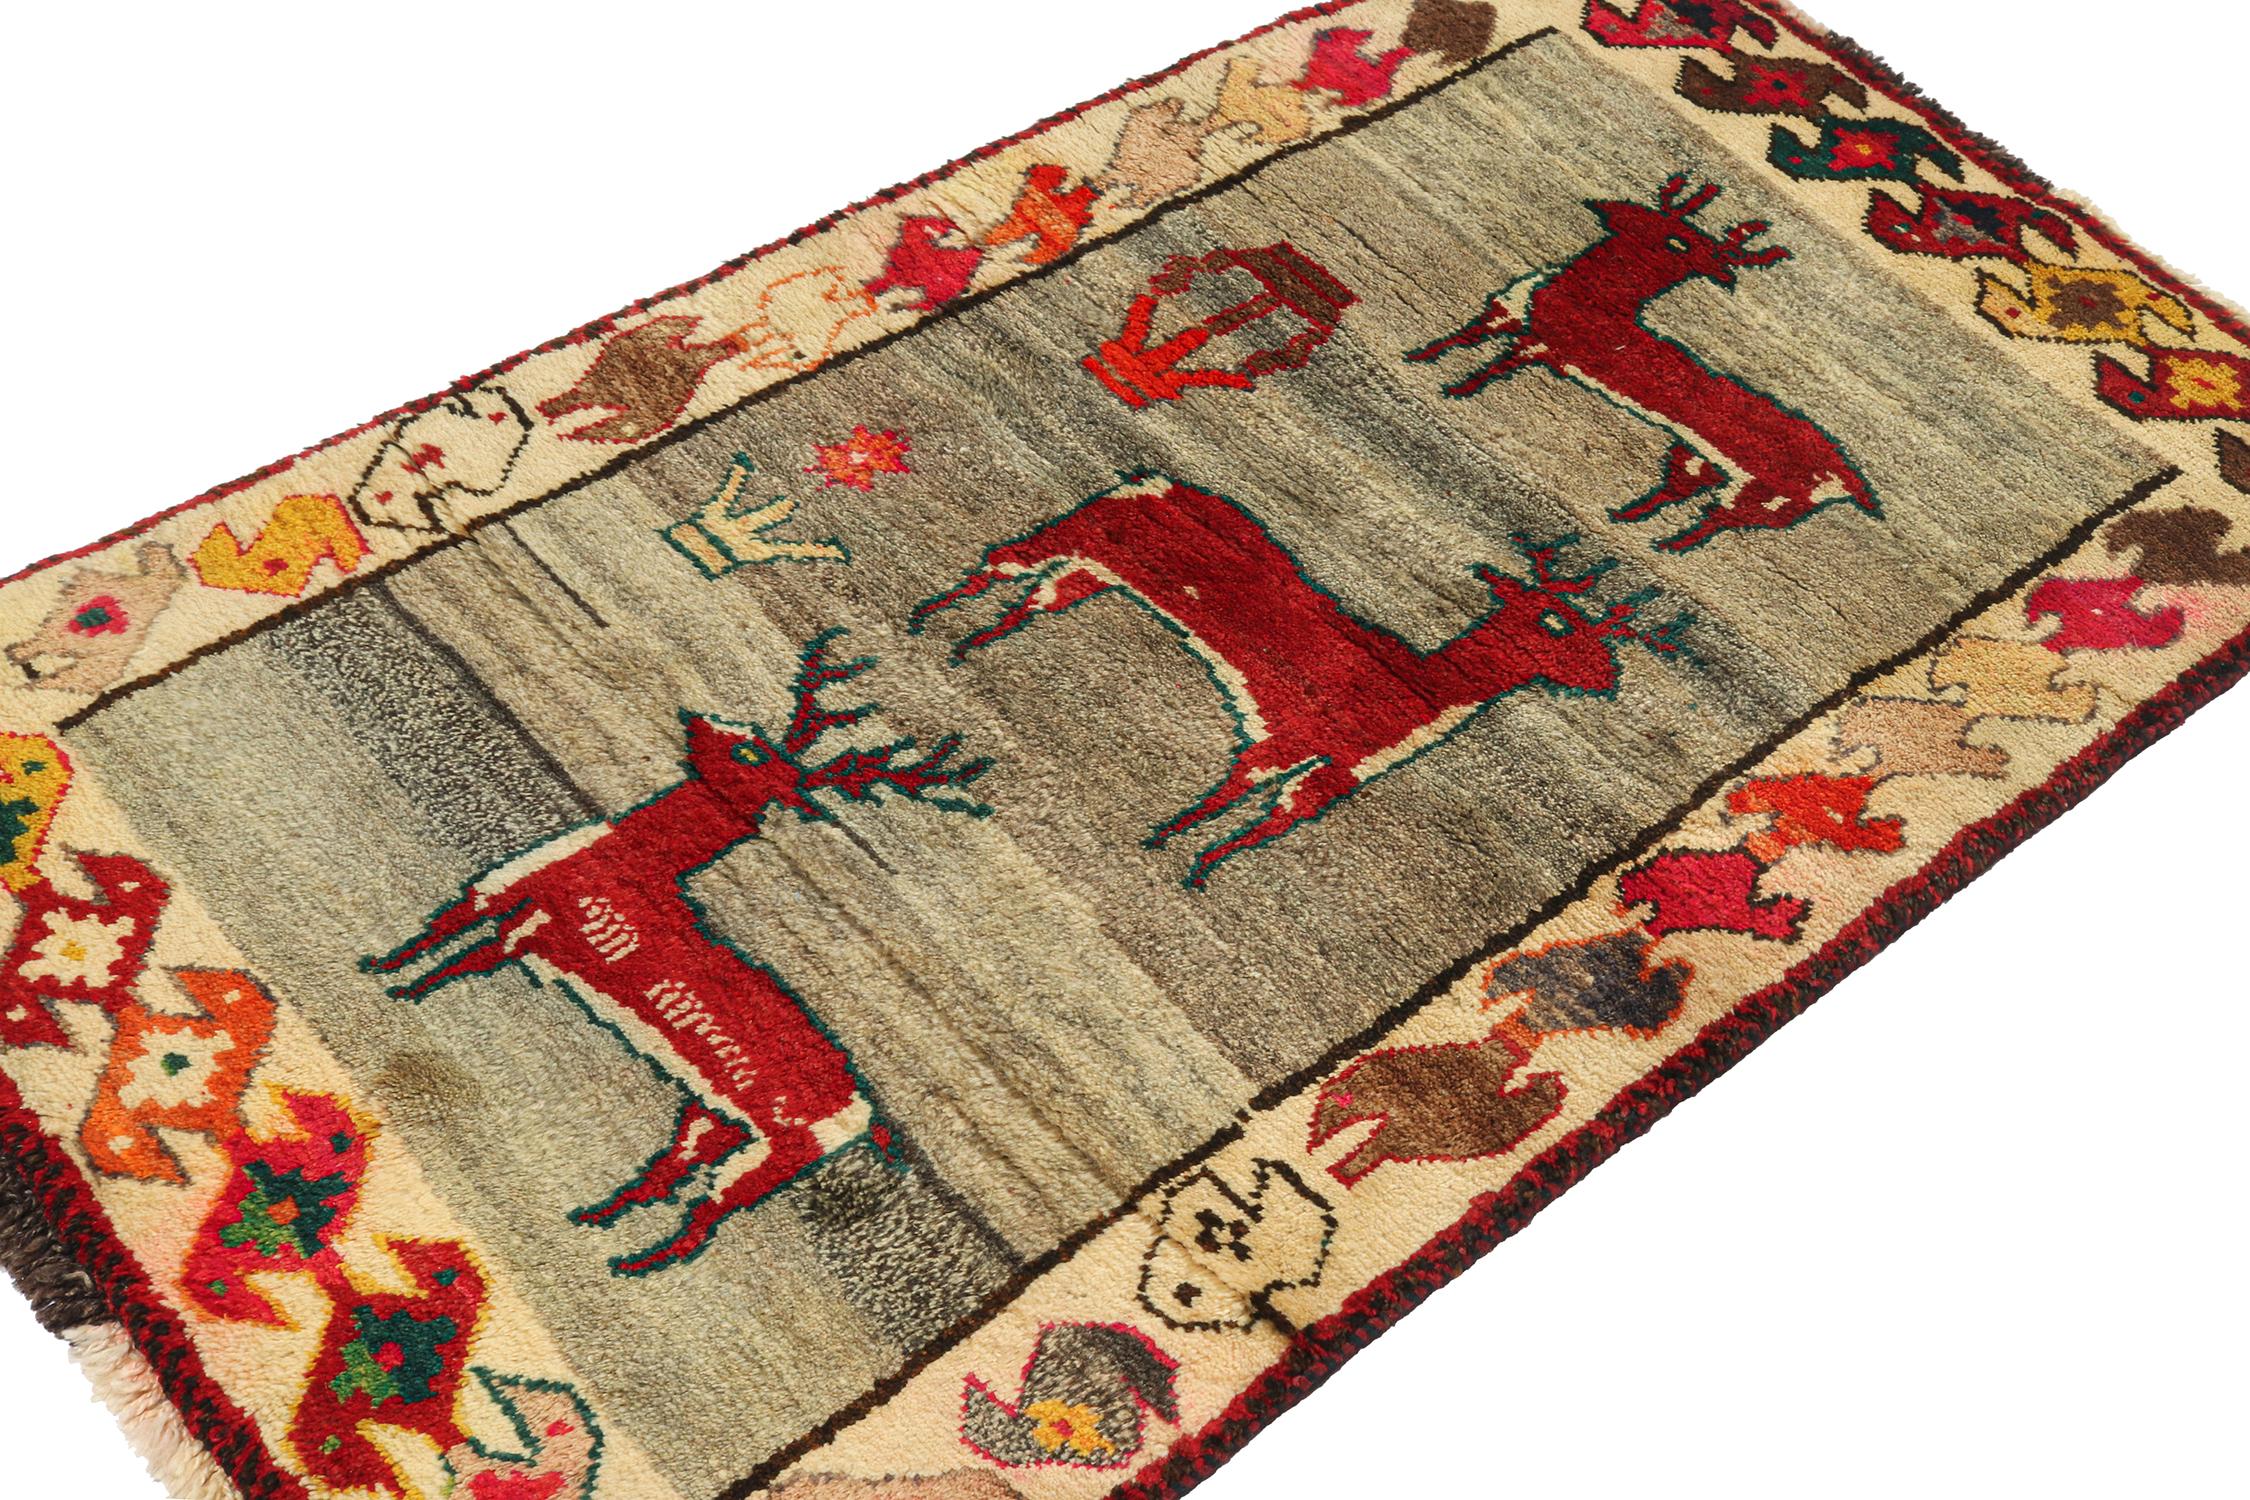 This vintage 3x5 Gabbeh Persian rug is from the latest entries in Rug & Kilim’s rare tribal curations. Hand-knotted in wool circa 1950-1960.
On the Design:
This tribal provenance is one of the most primitive, and collectible shabby-chic styles in